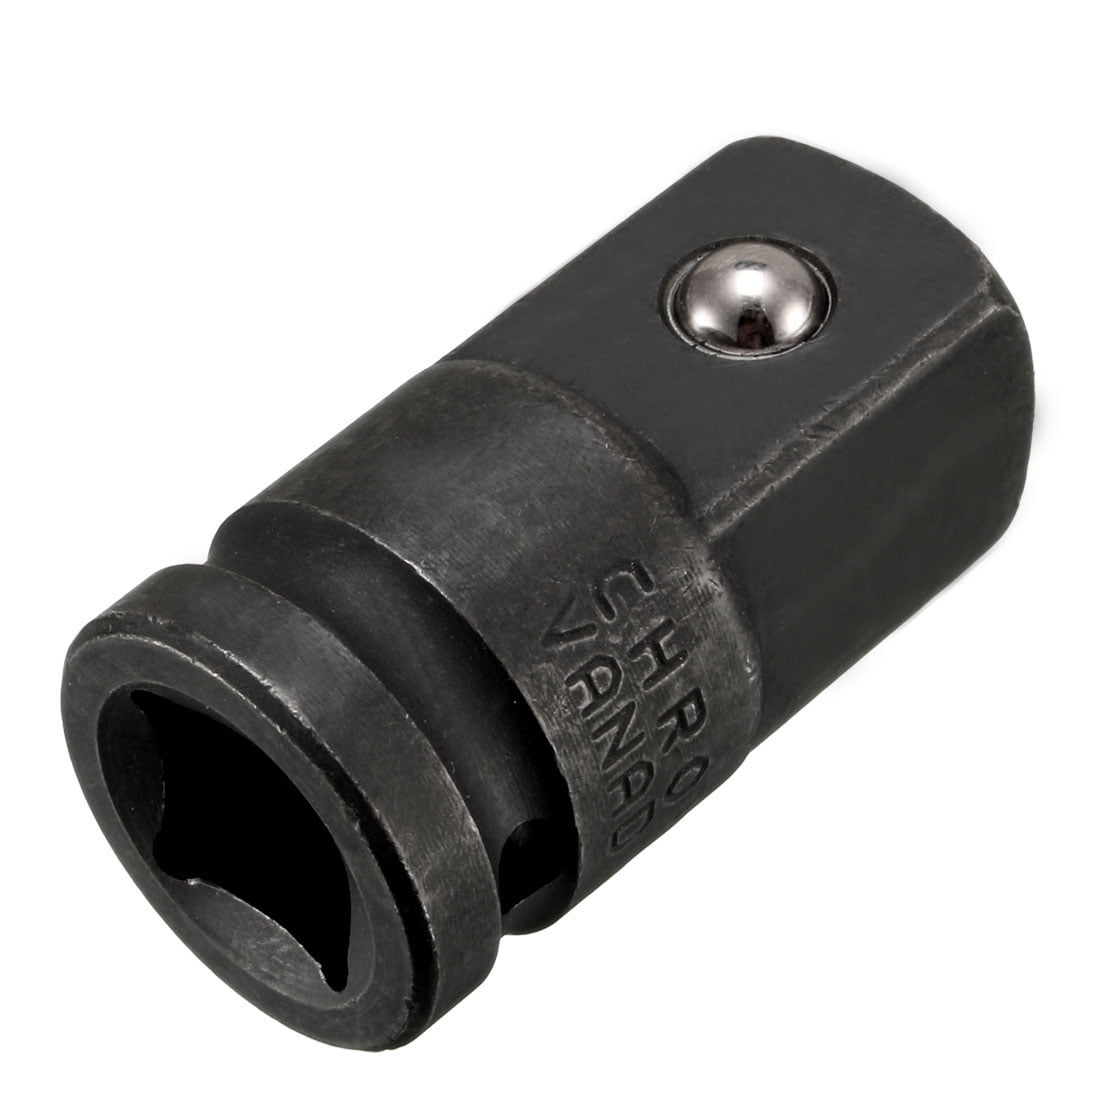 1/2 Inch (F) to 3/4 Inch (M) Drive Impact Socket Adapter ...